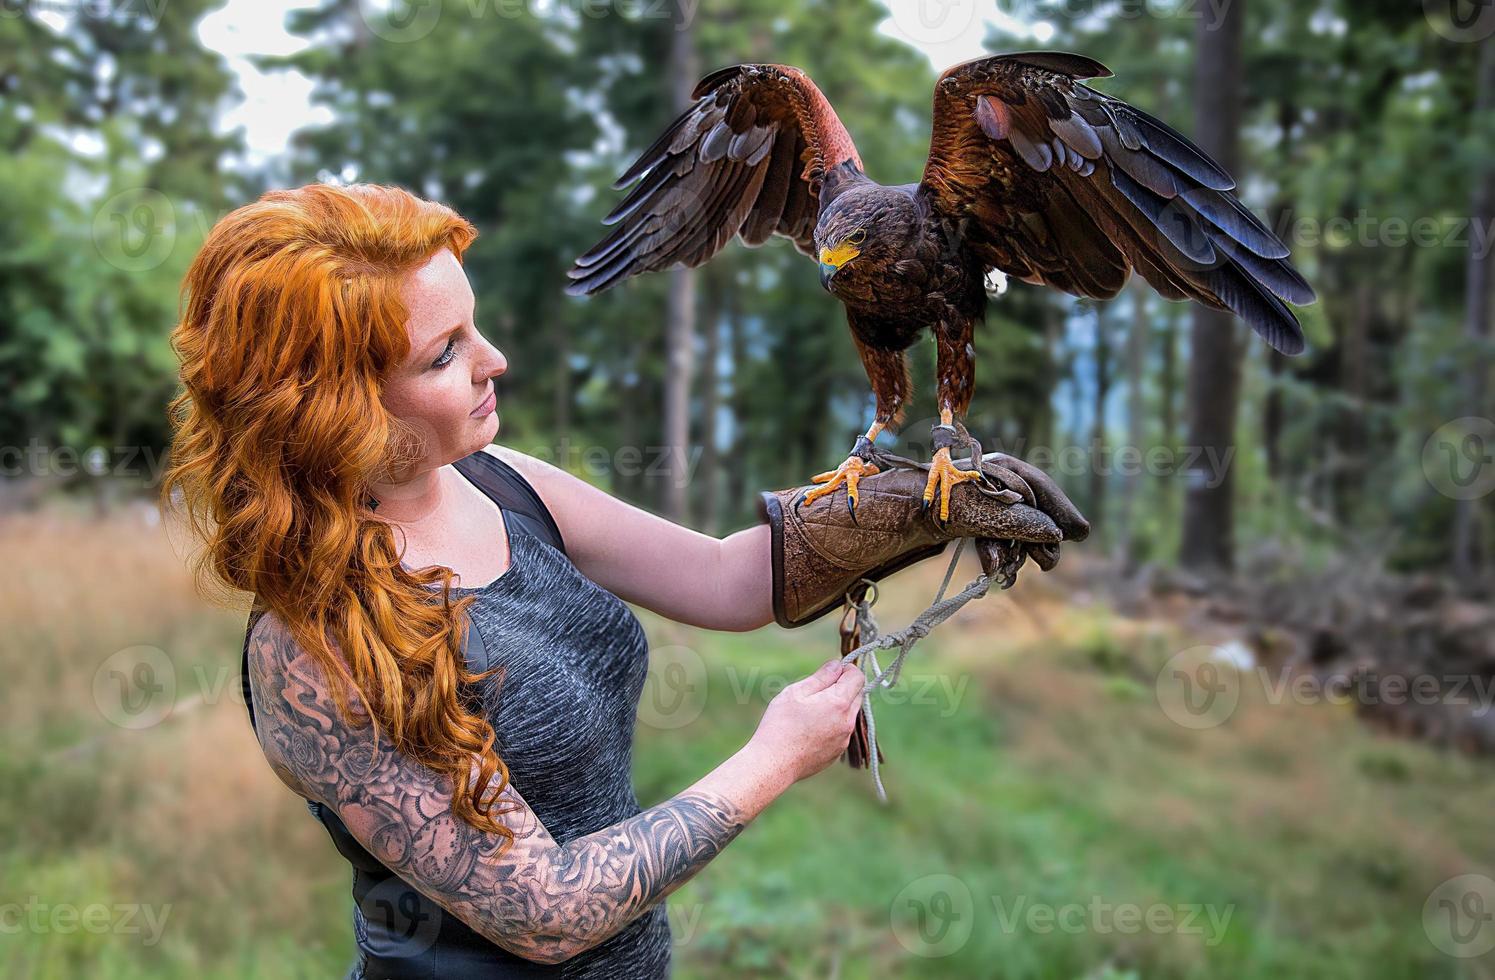 The Lady with the harris hawk photo